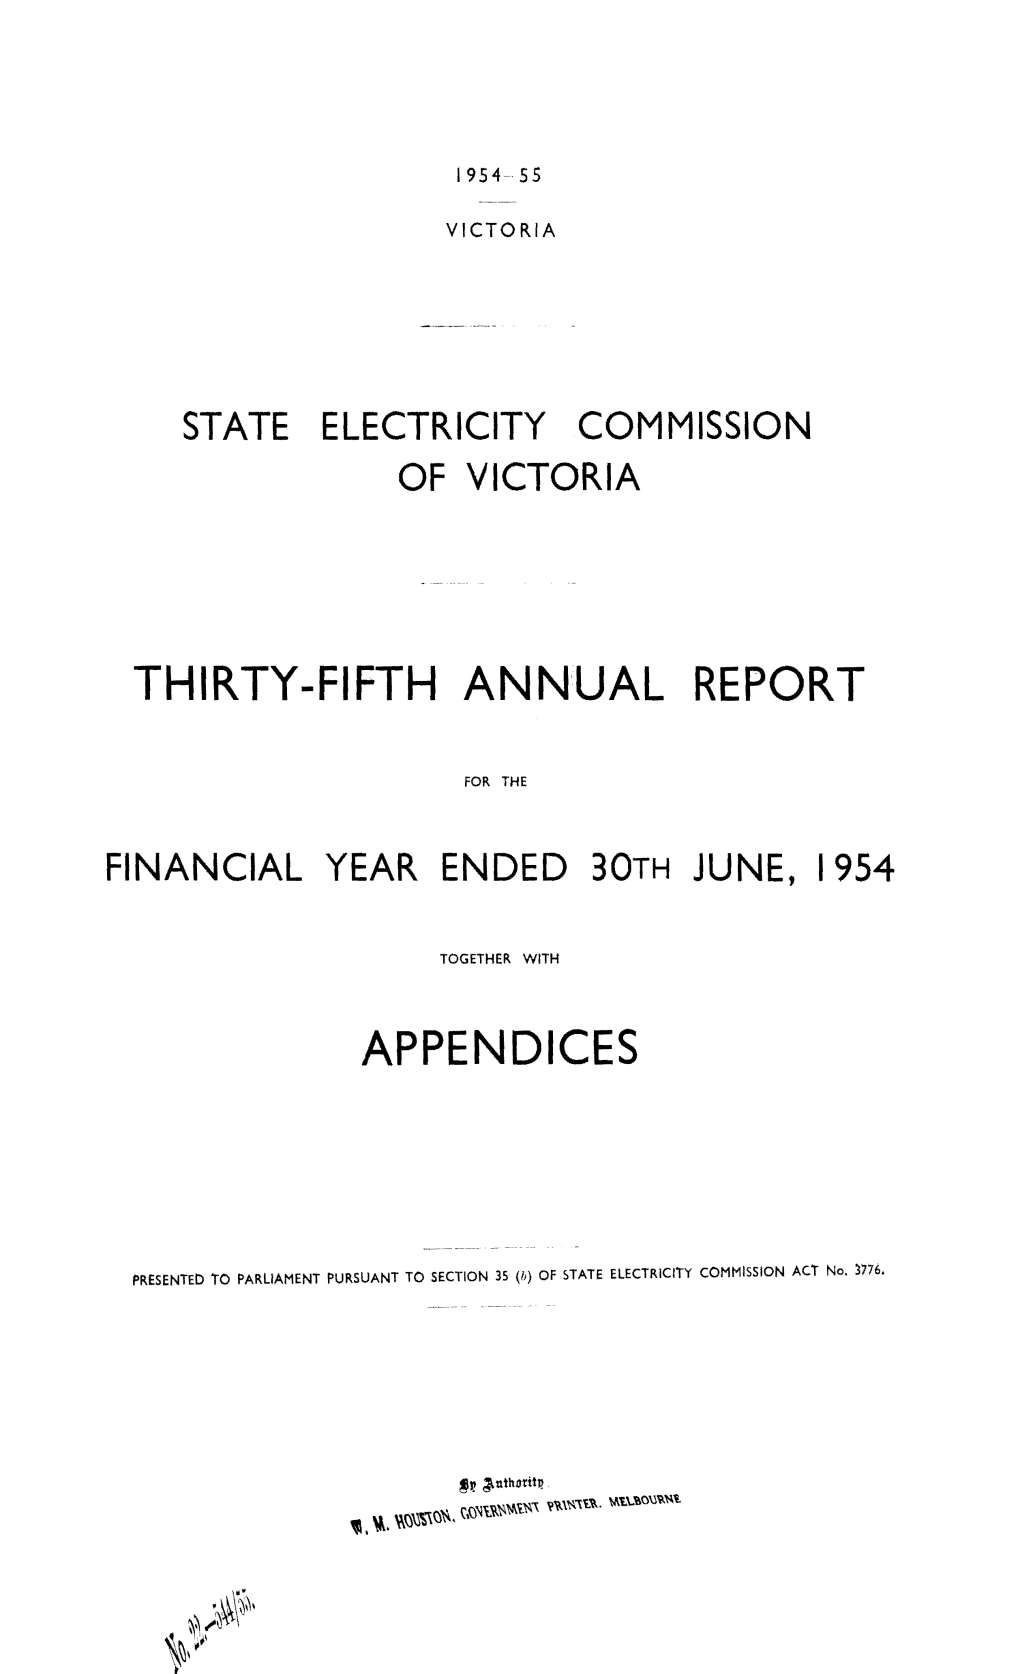 Thirty-Fifth Ann'ual Report Appendices